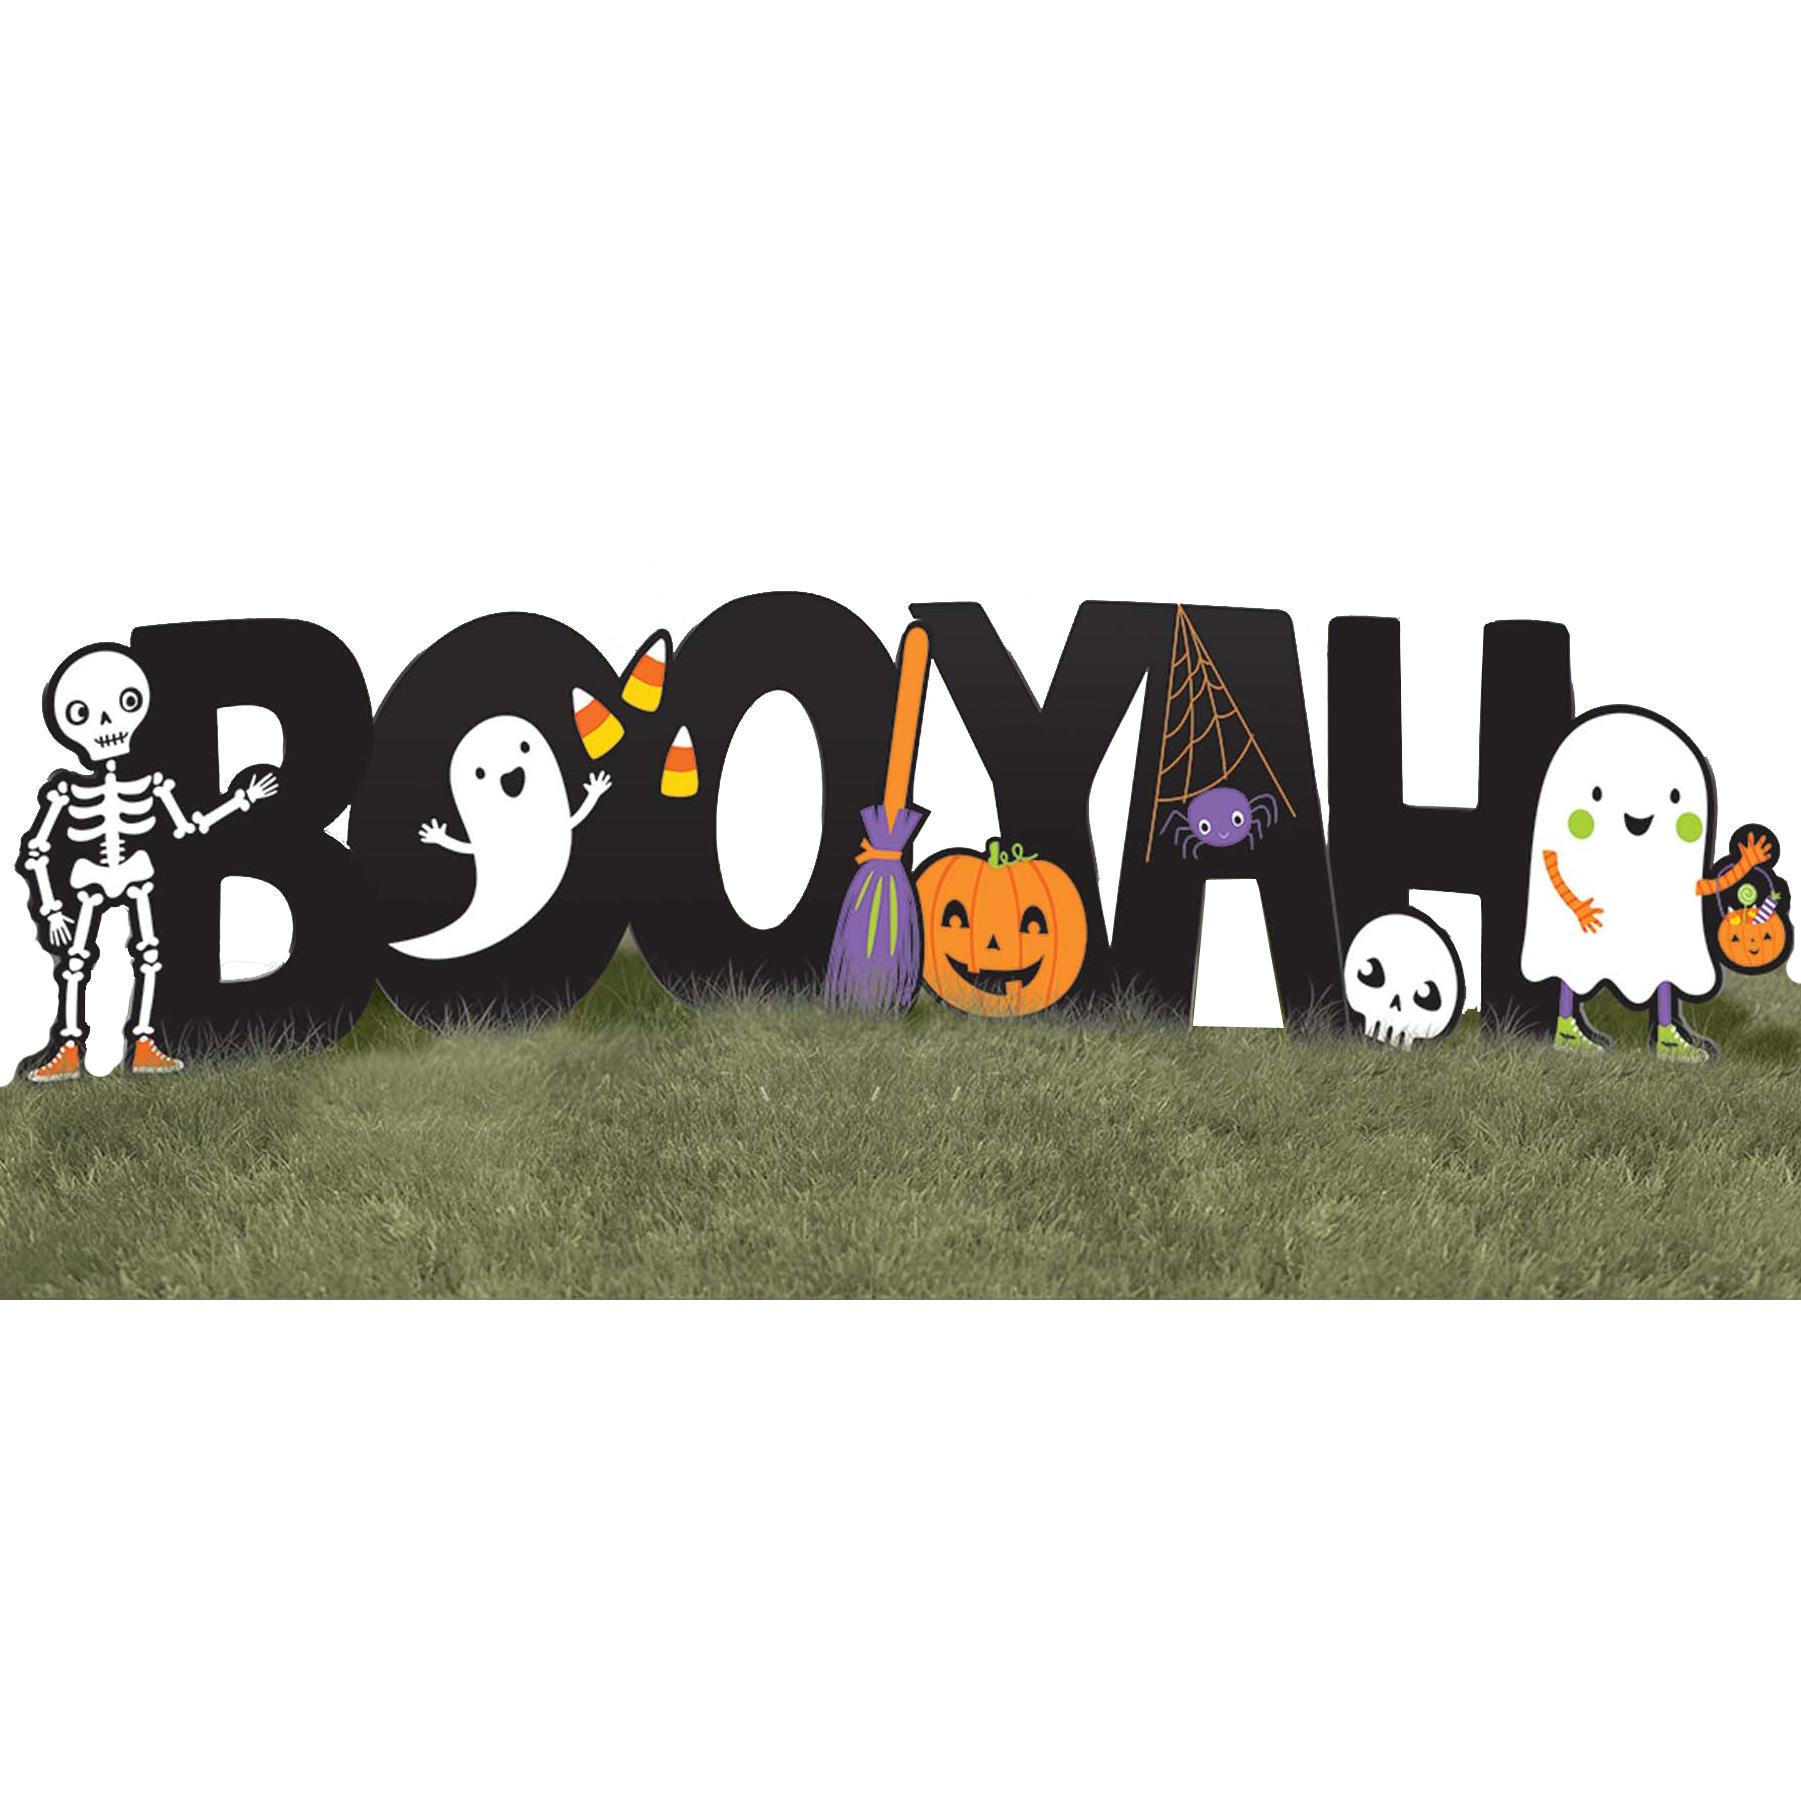 Halloween Boo-Yah! Corrugate & Plastic Yard Sign Decorations - Party Centre